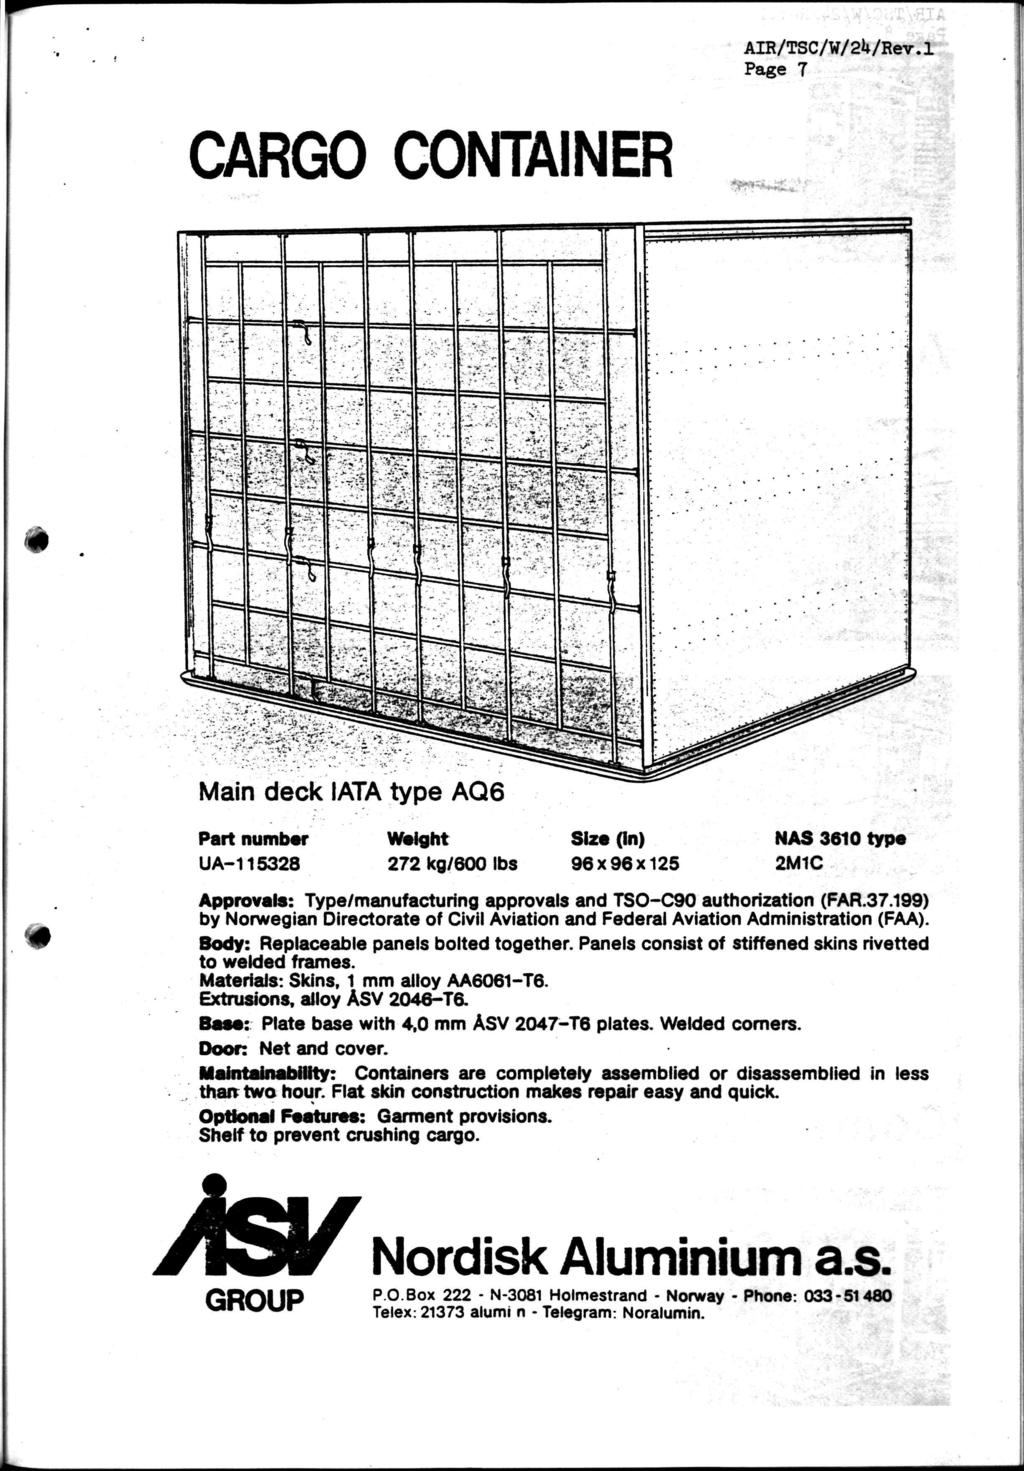 Page 7 CARGO CONTAINER Main deck IATA type AQ6 Part number UA-115328 Weight 272 kg/600 lbs Size (in) 96x96x125 NAS 3610 type 2M1C Approvals: Type/manufacturing approvals and TSO-C90 authorization